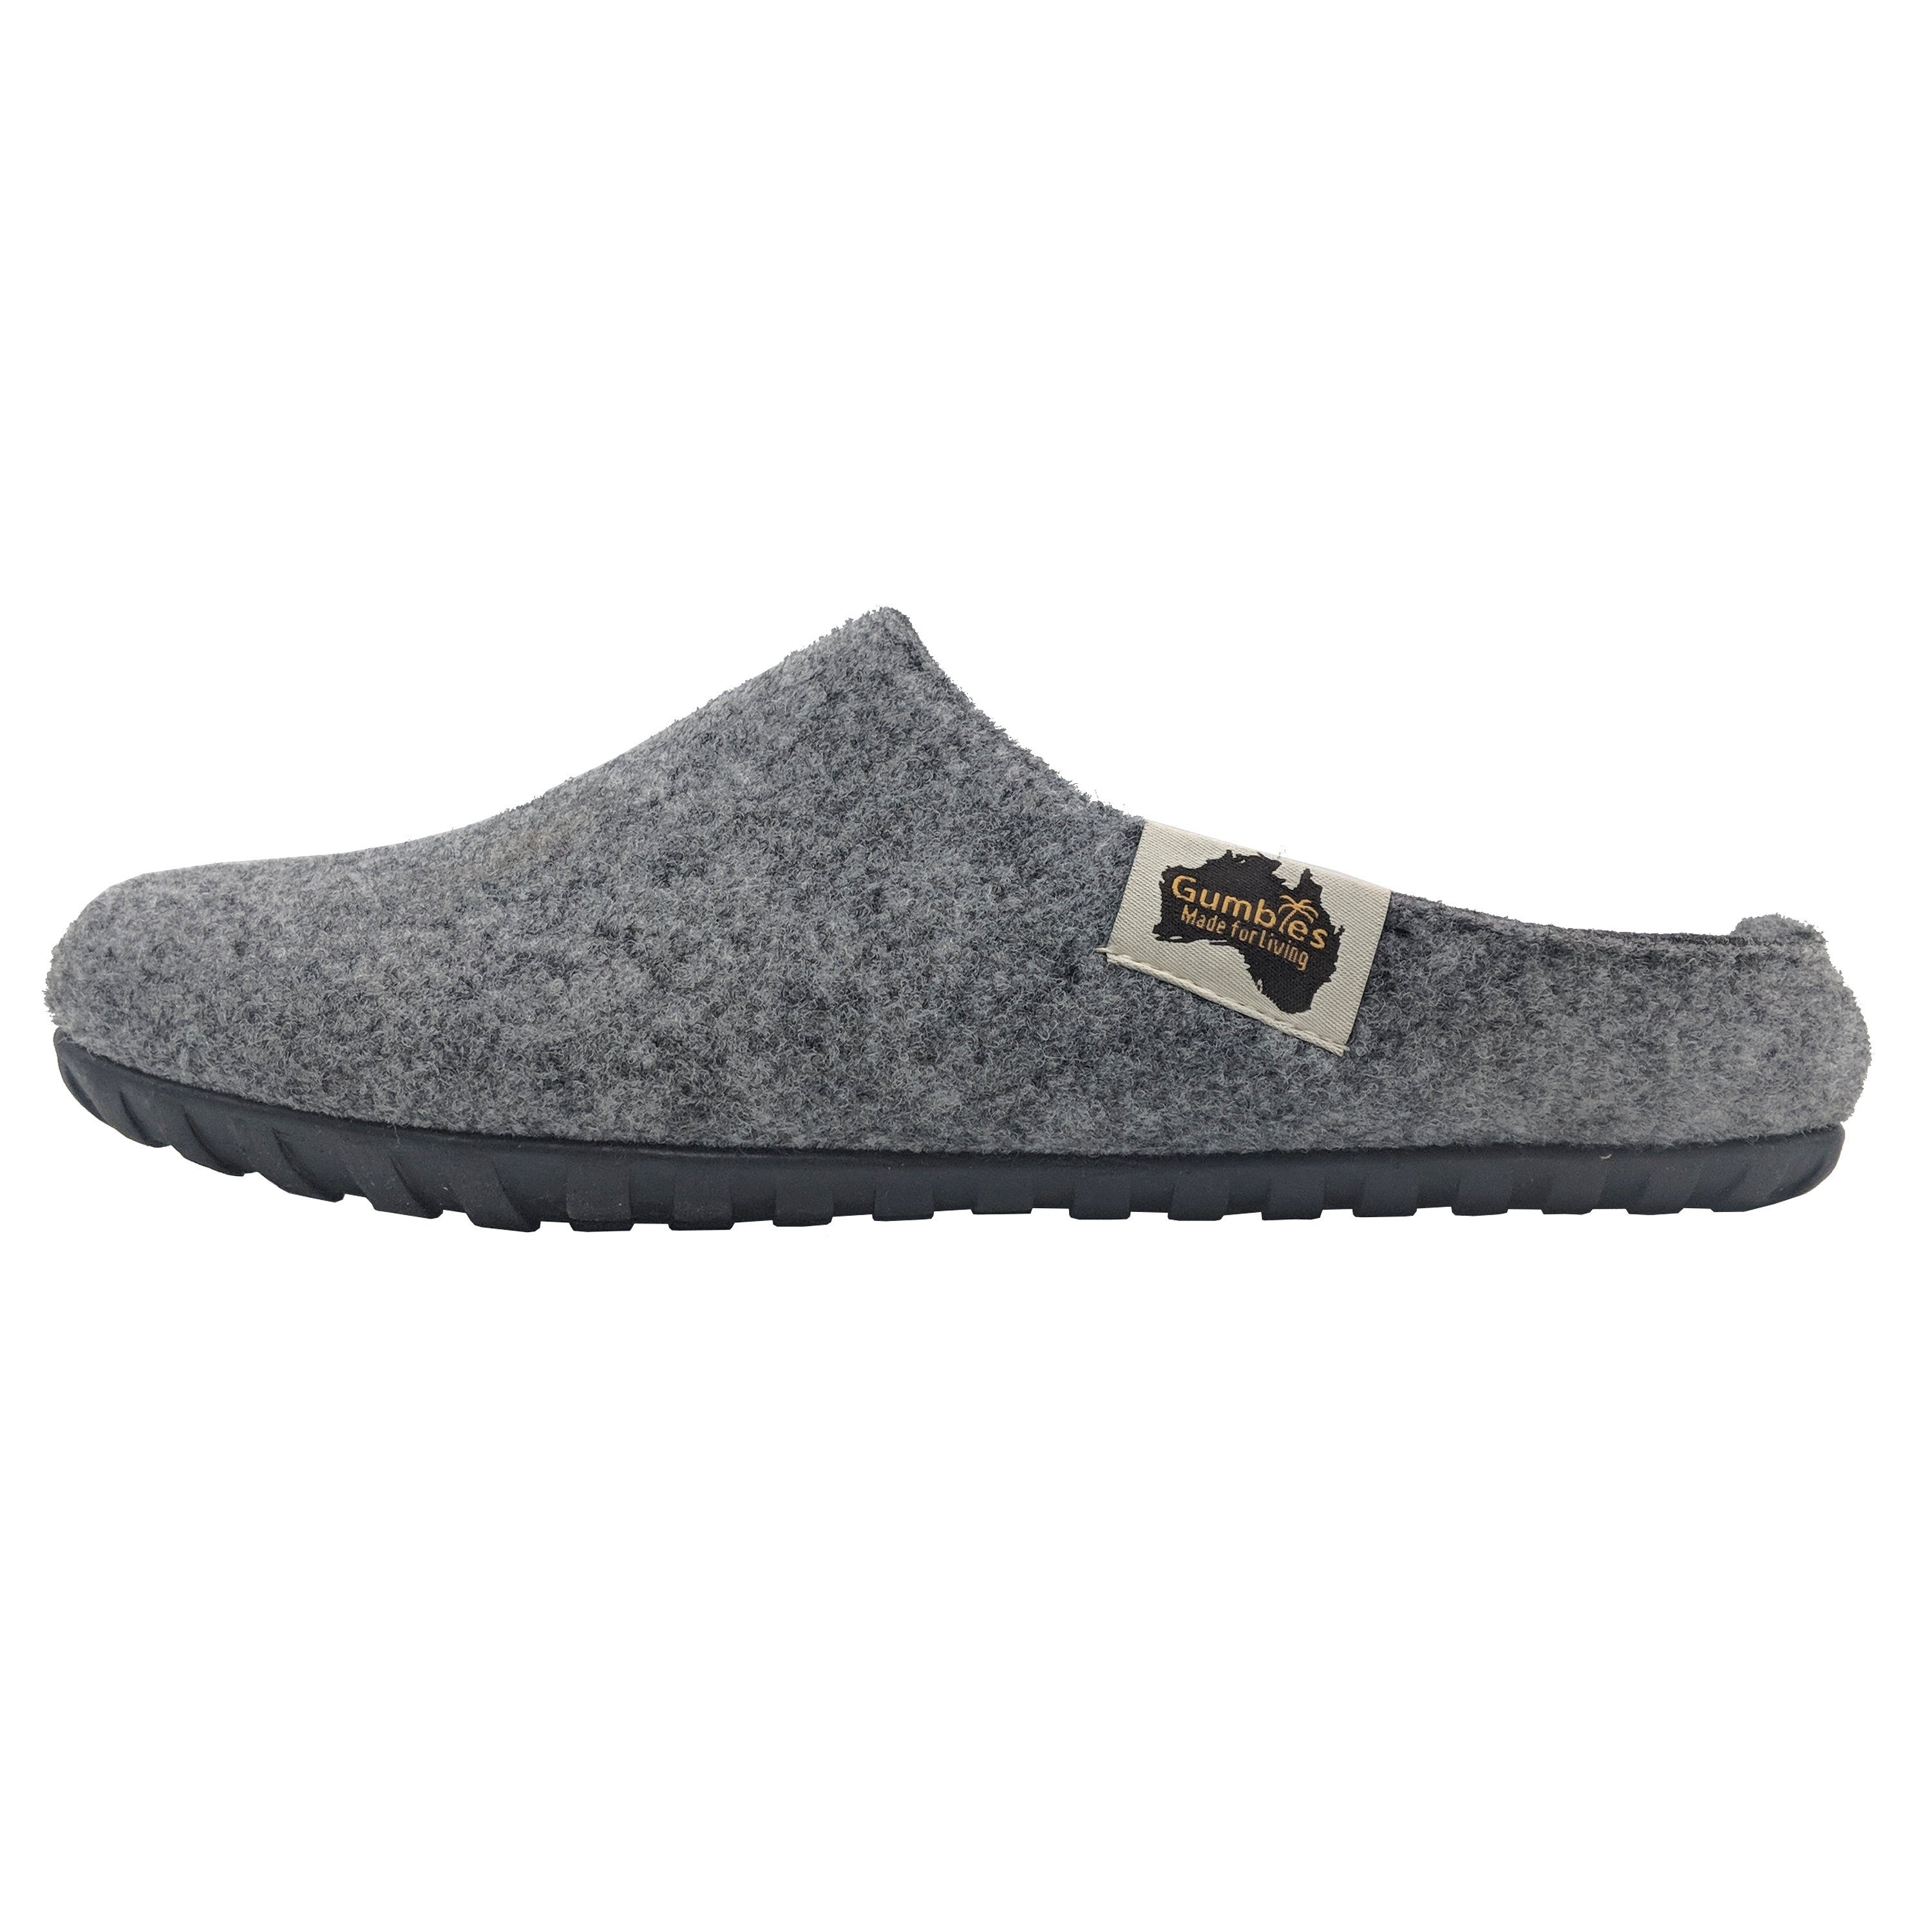 Outback Slipper »in Grey Designs« aus recycelten farbenfrohen in Charcoal Gumbies Hausschuh Materialien